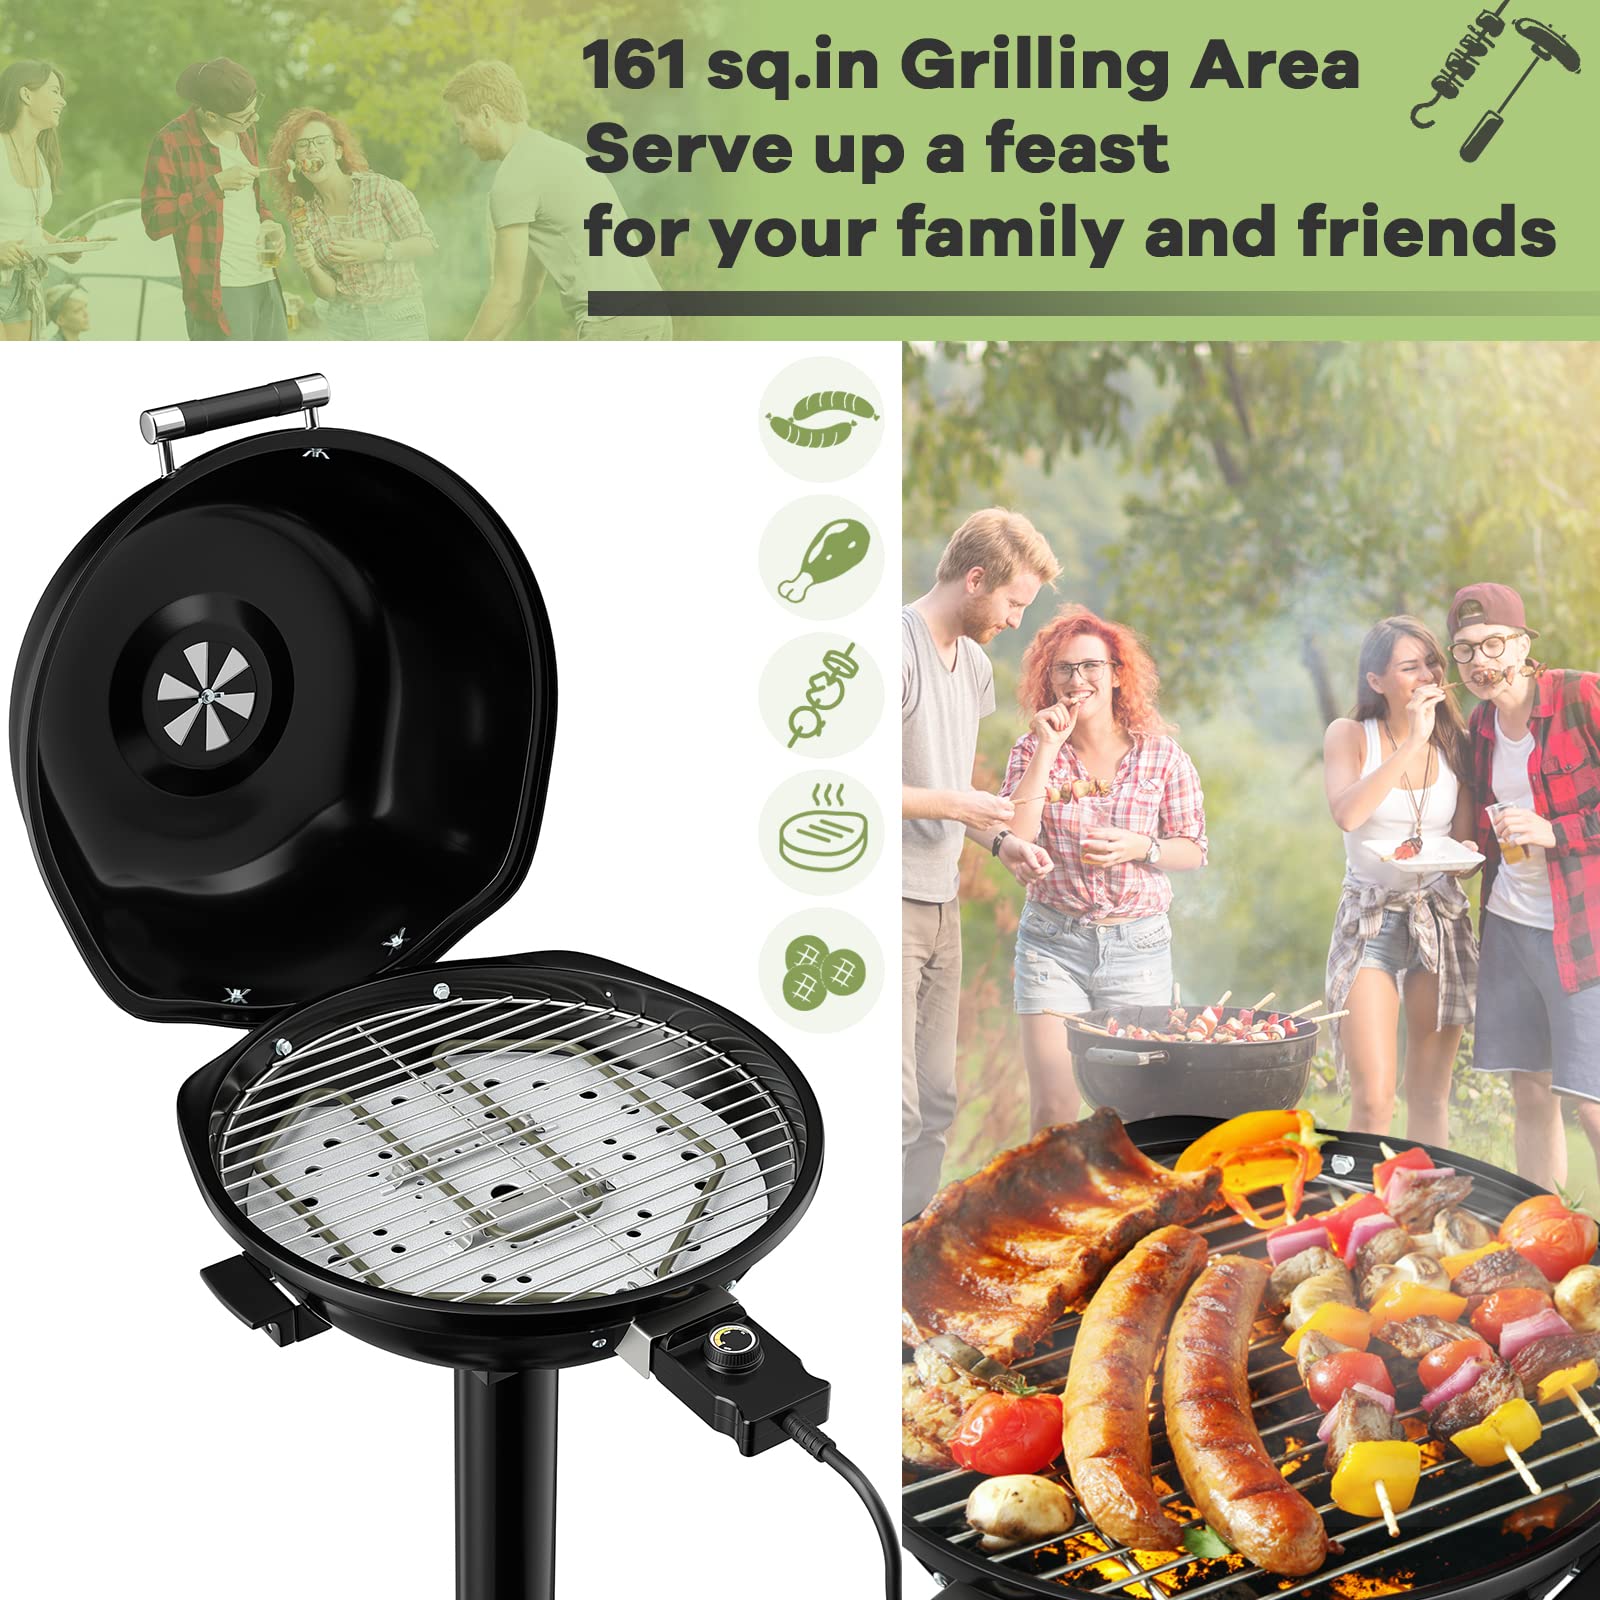 Giantex Electric BBQ Grill - 1600 Watts Portable Standing Grill